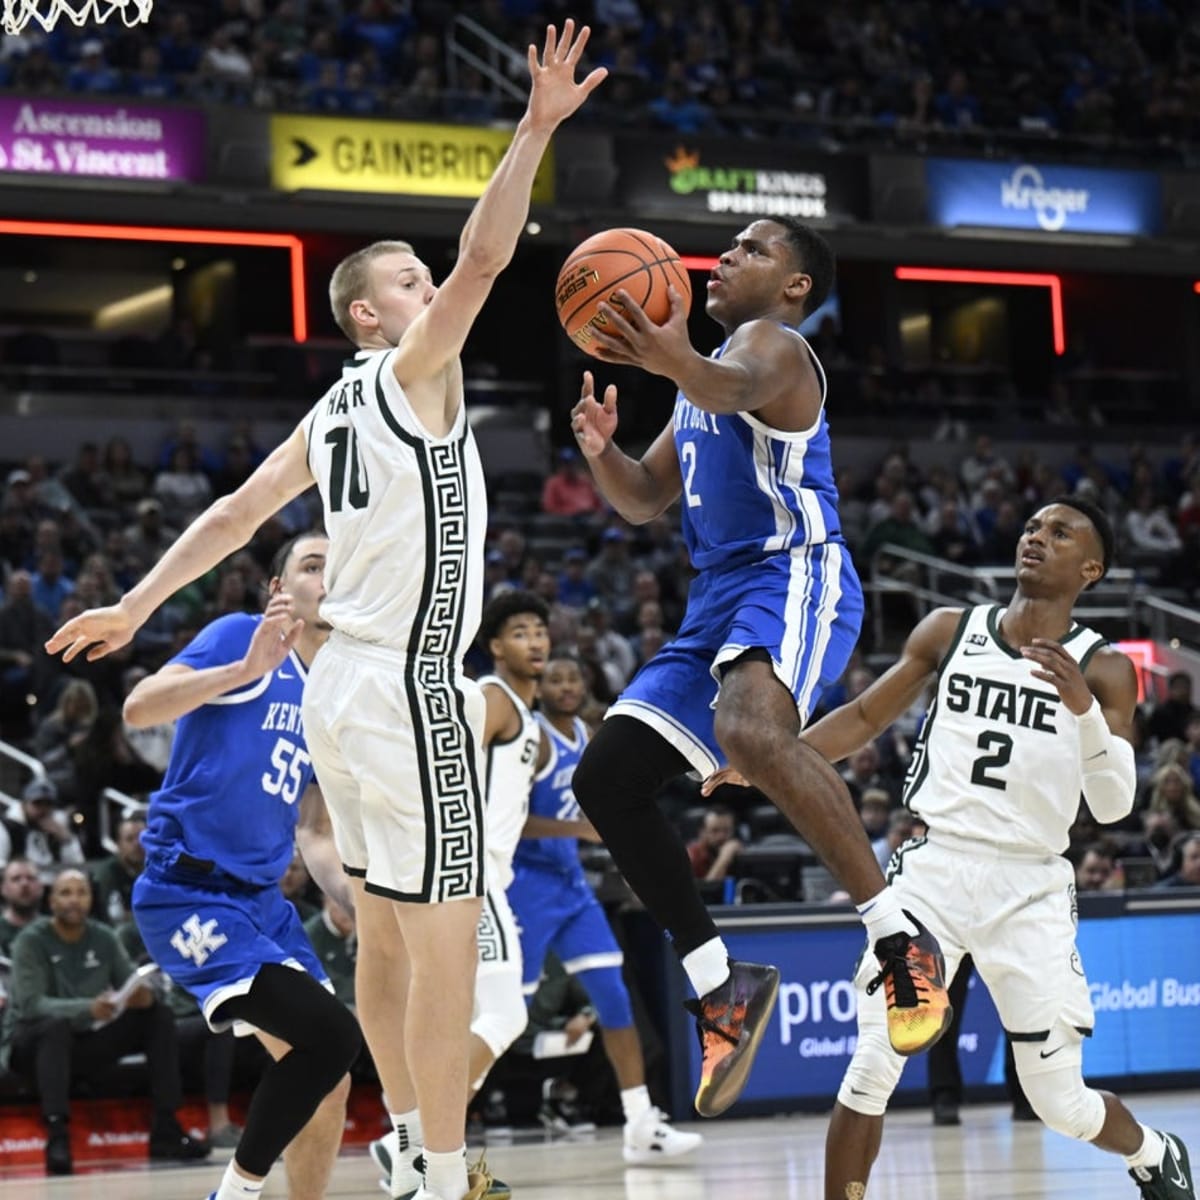 How to watch Kentucky-Miami basketball today: Channel, time